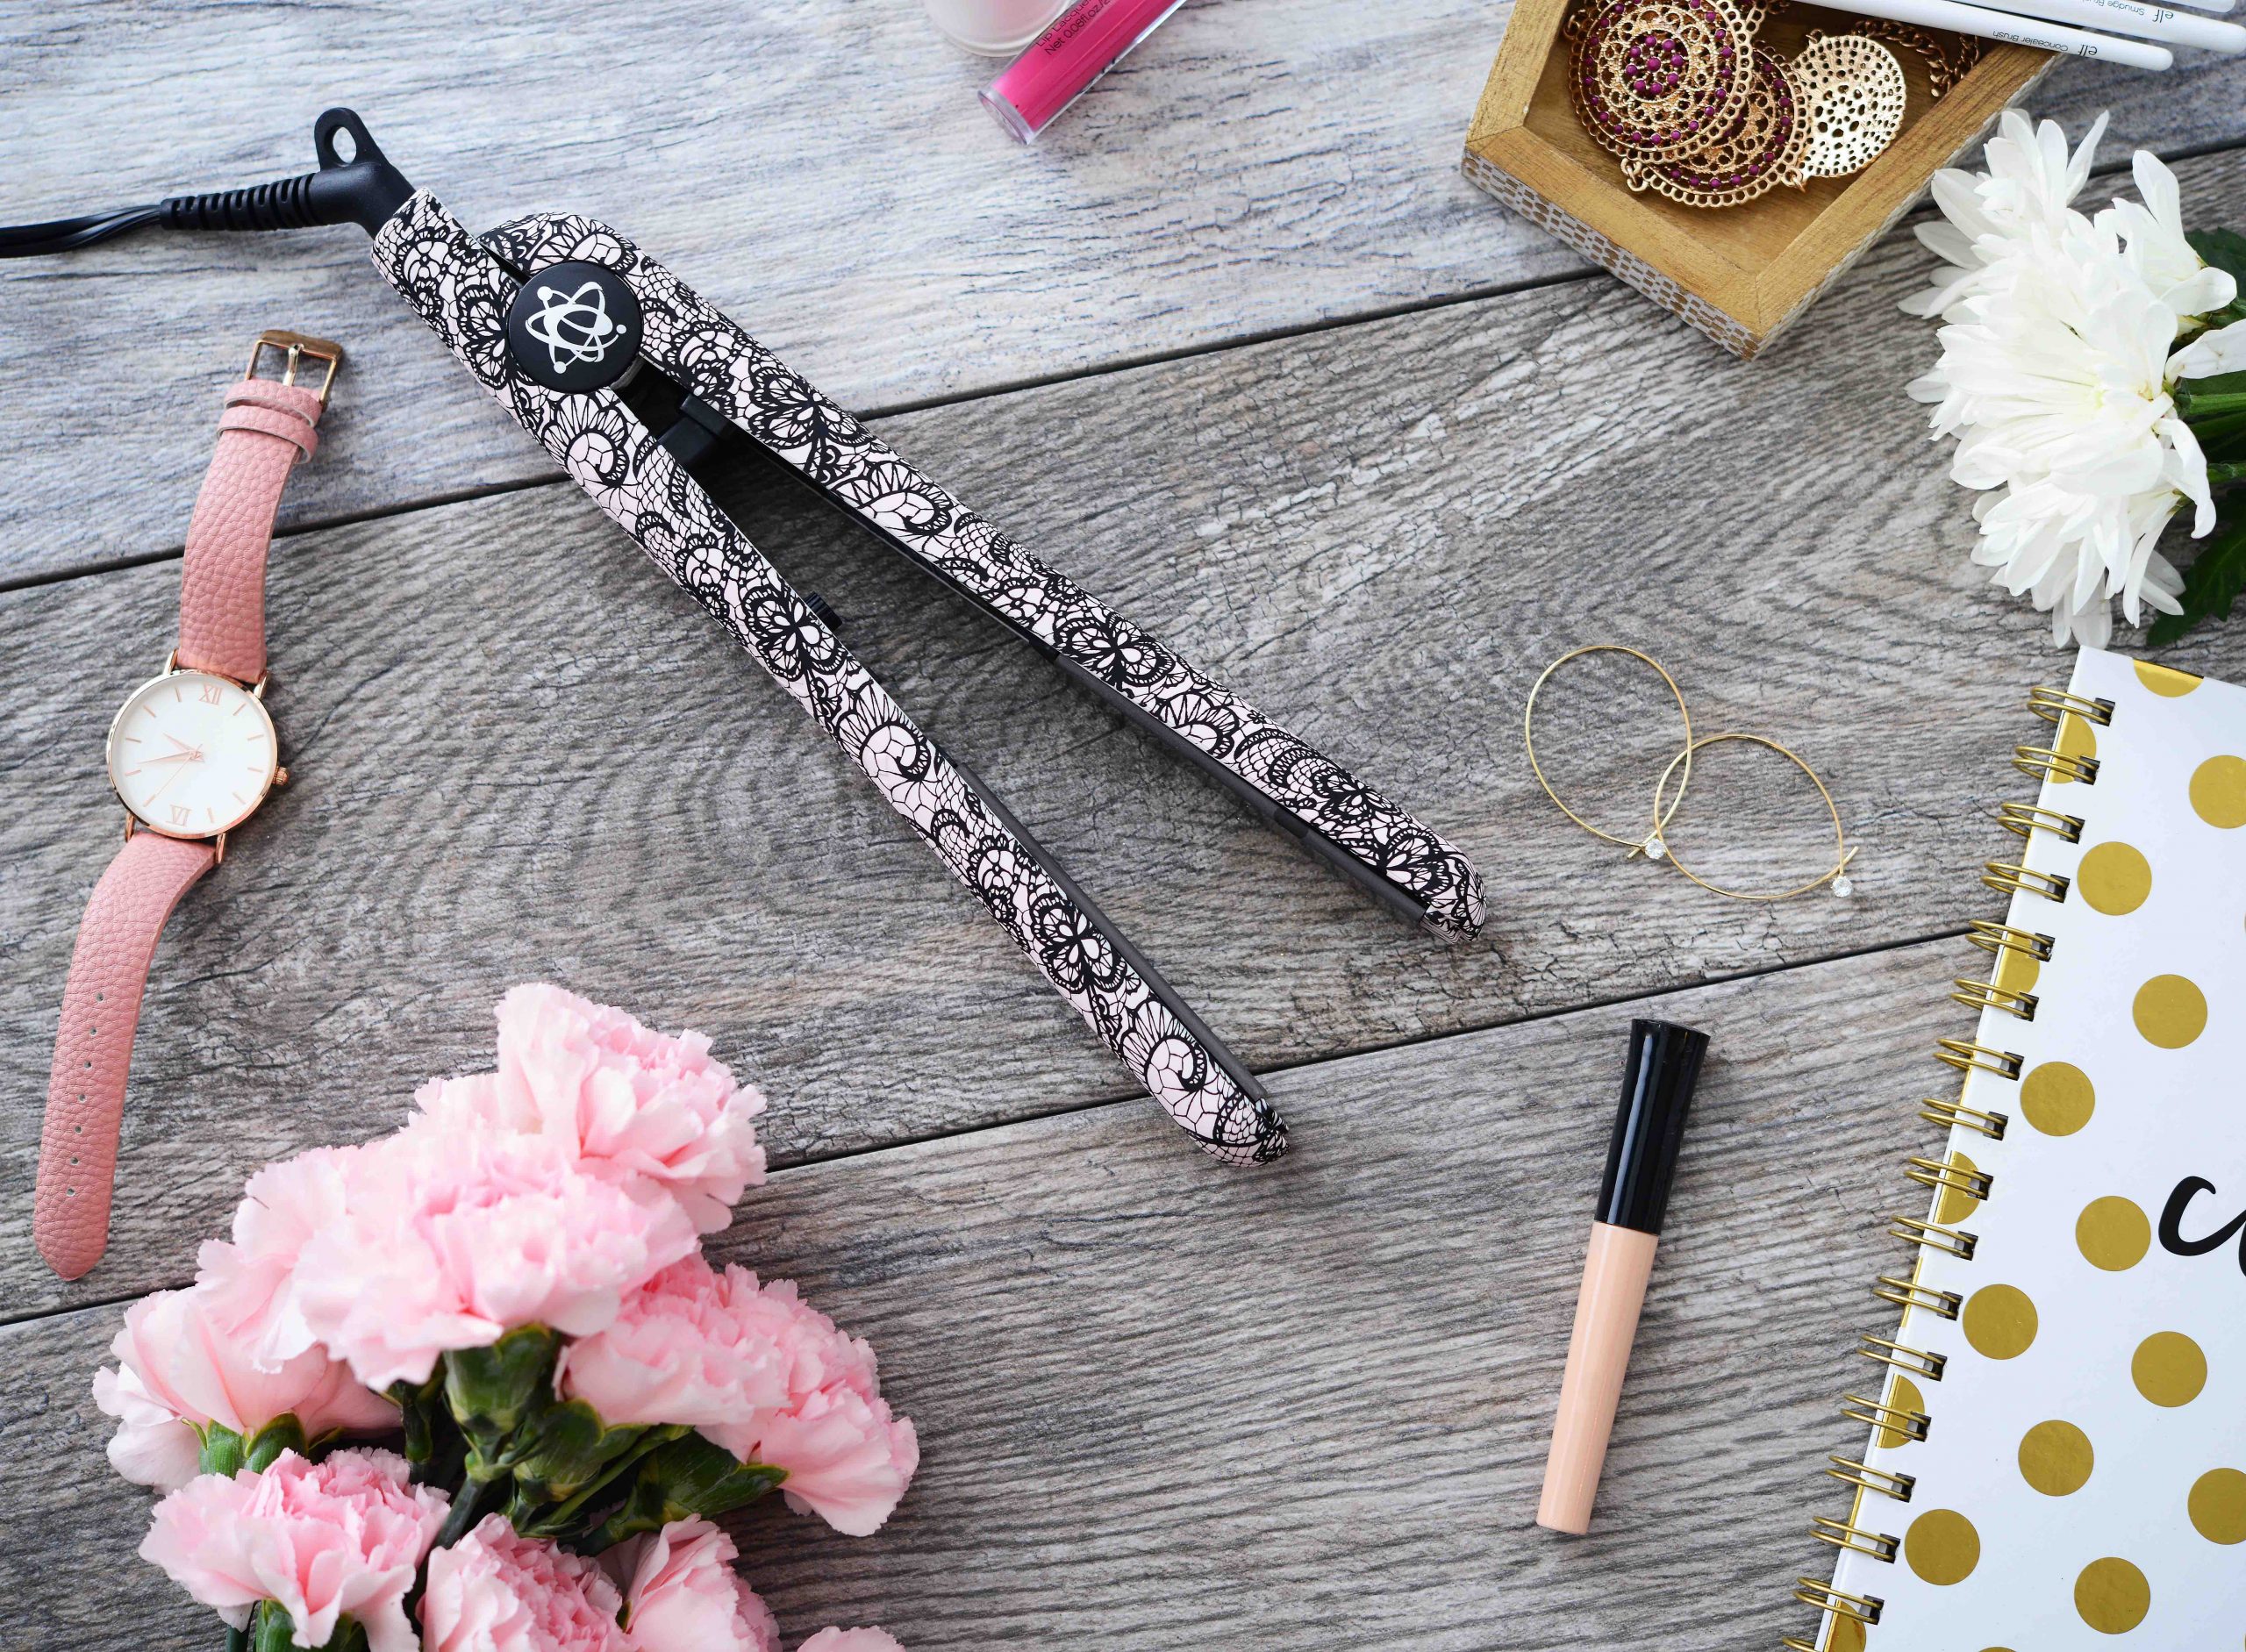 Evalectric Reviews The Best Styling Tools for Short Hair | Evalectric